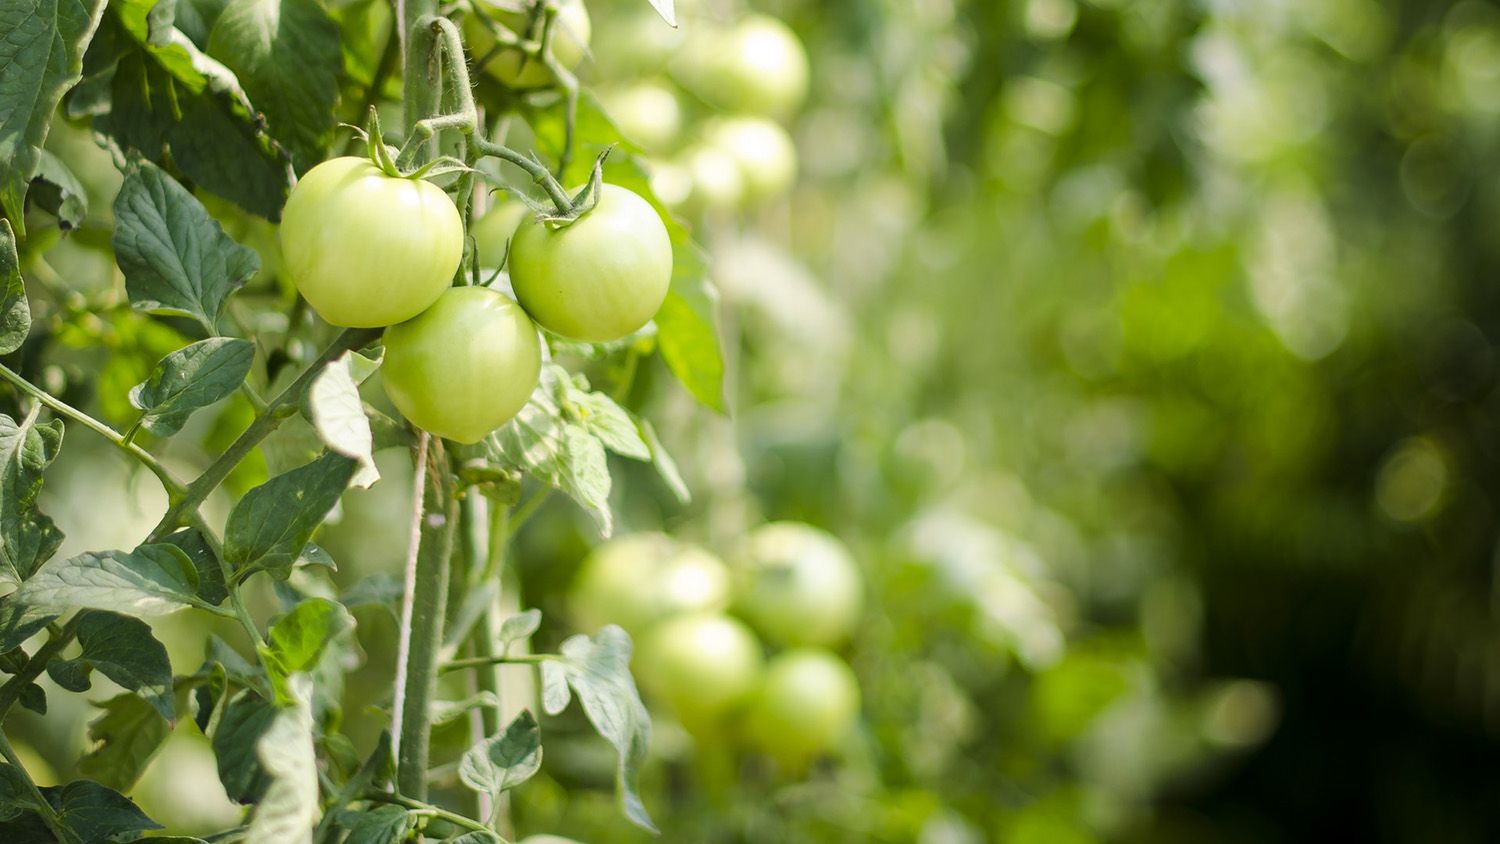 field of green tomatoes